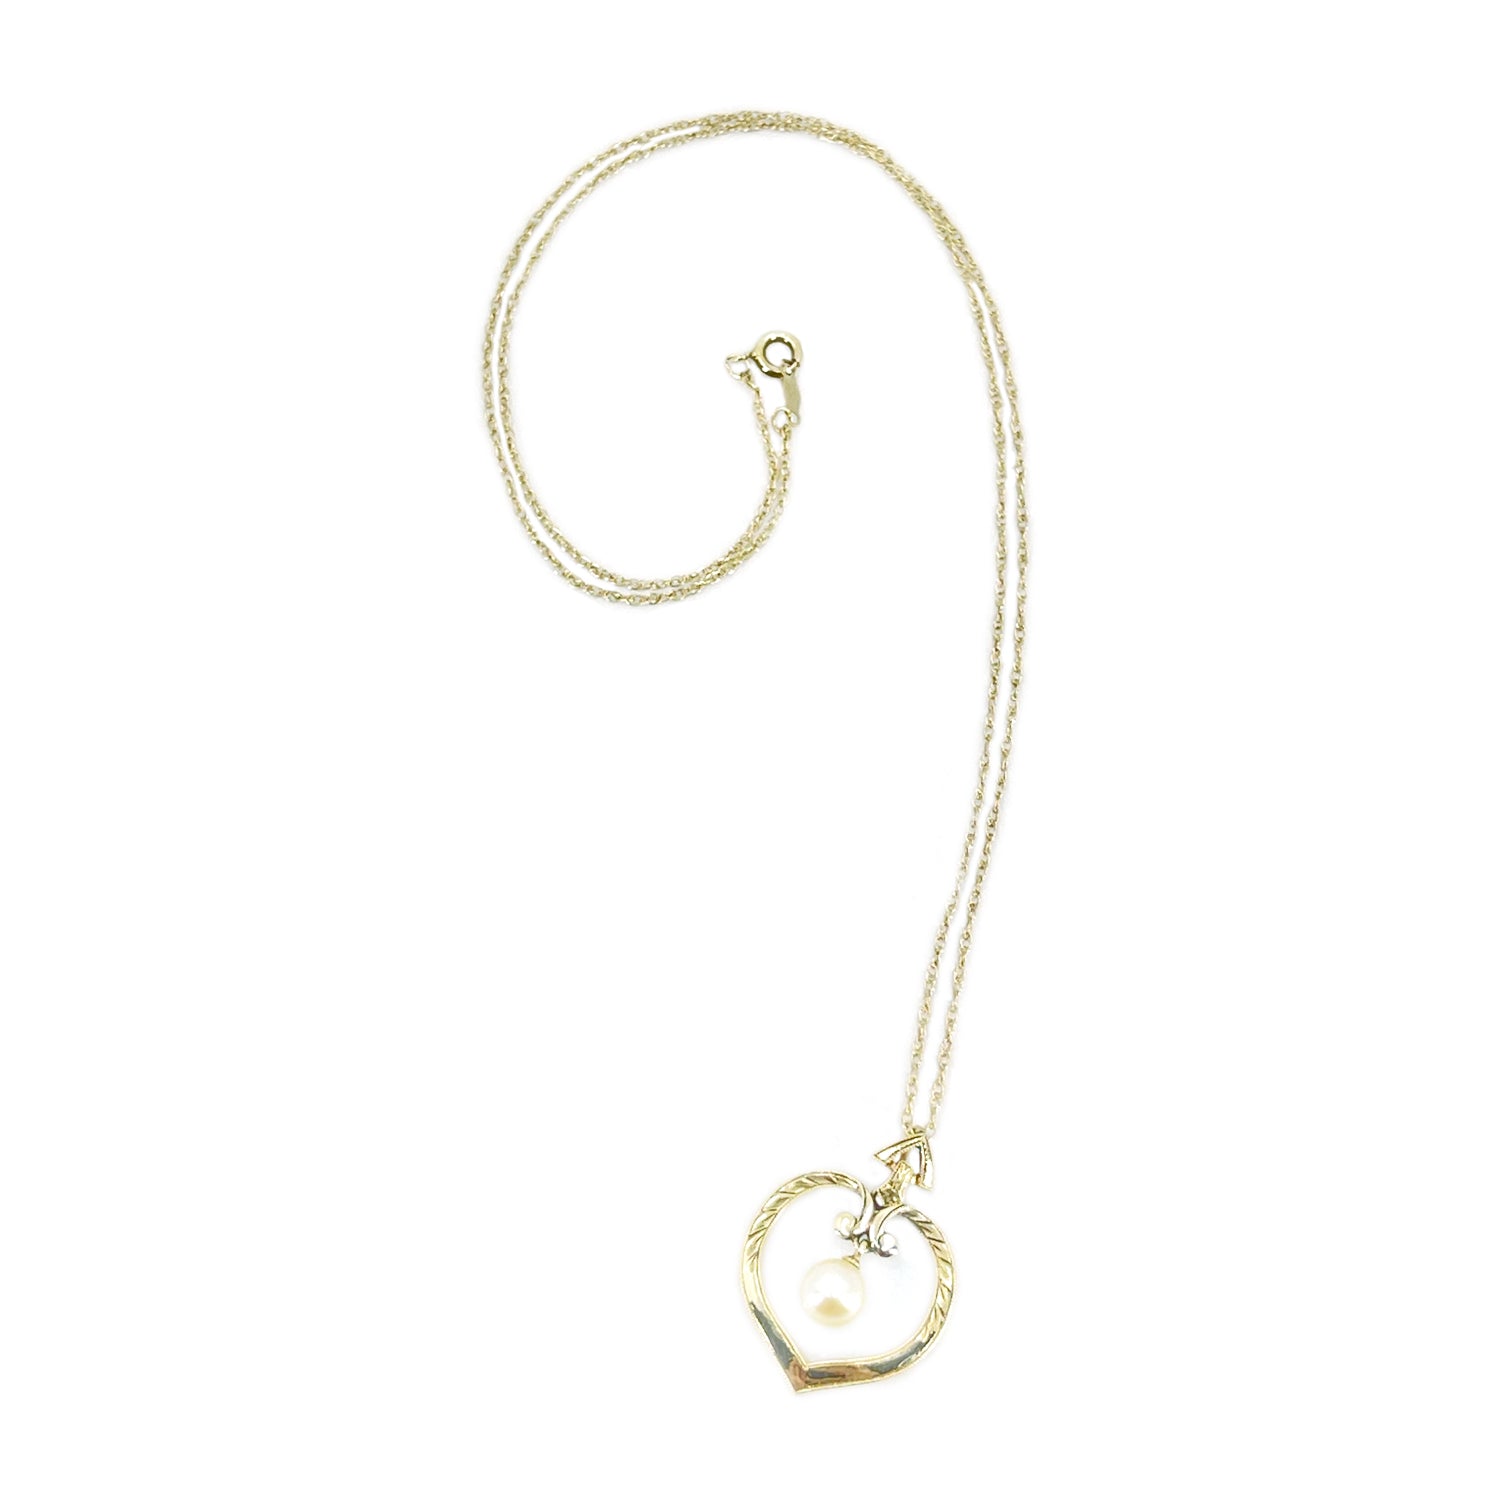 Mikimoto Deco Style Heart Vintage Japanese Saltwater Akoya Cultured Pearl Necklace- 14K Yellow Gold 18 Inch